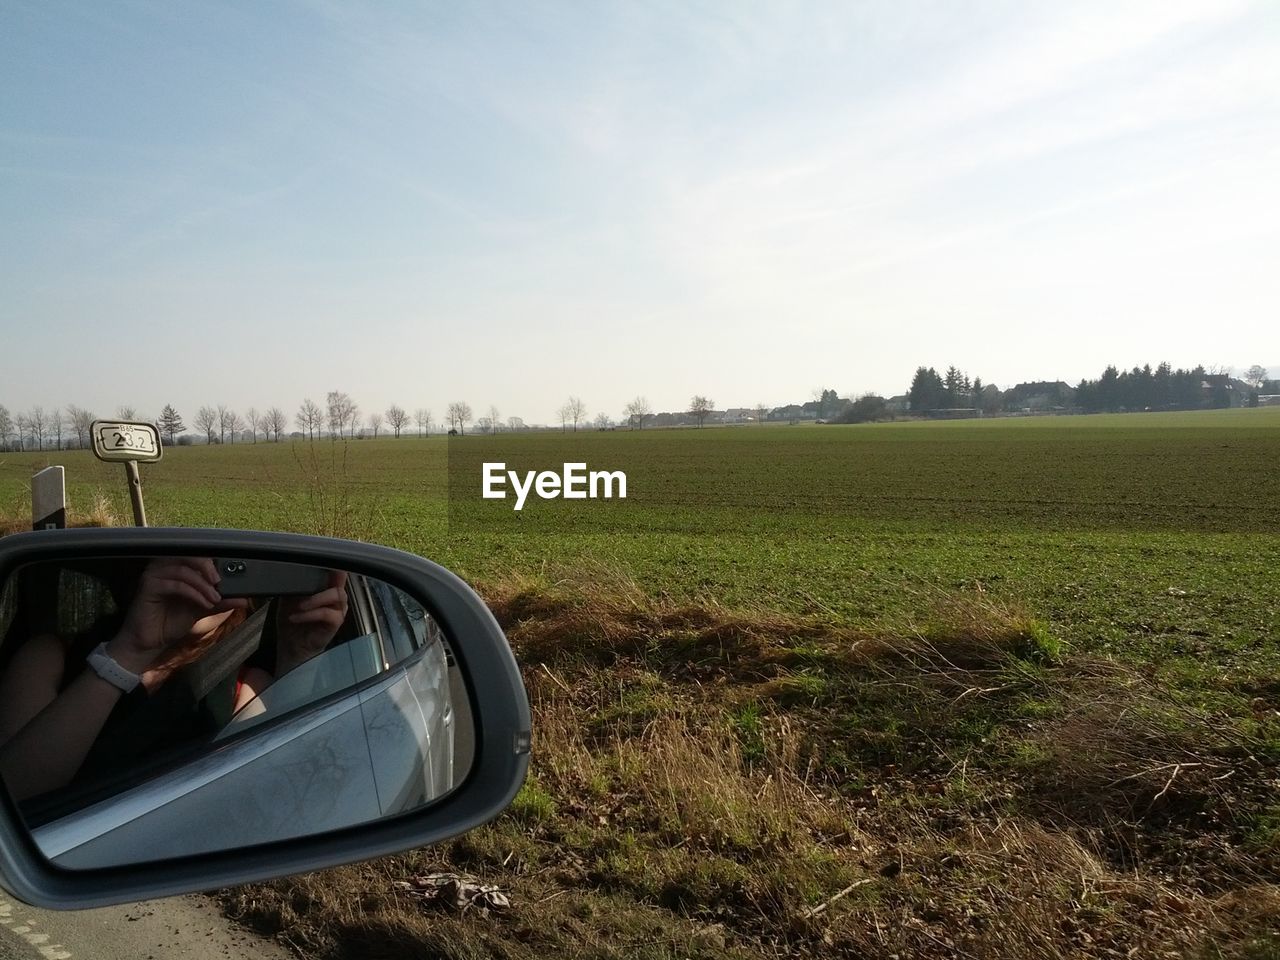 Reflection of woman on side-view mirror photographing field